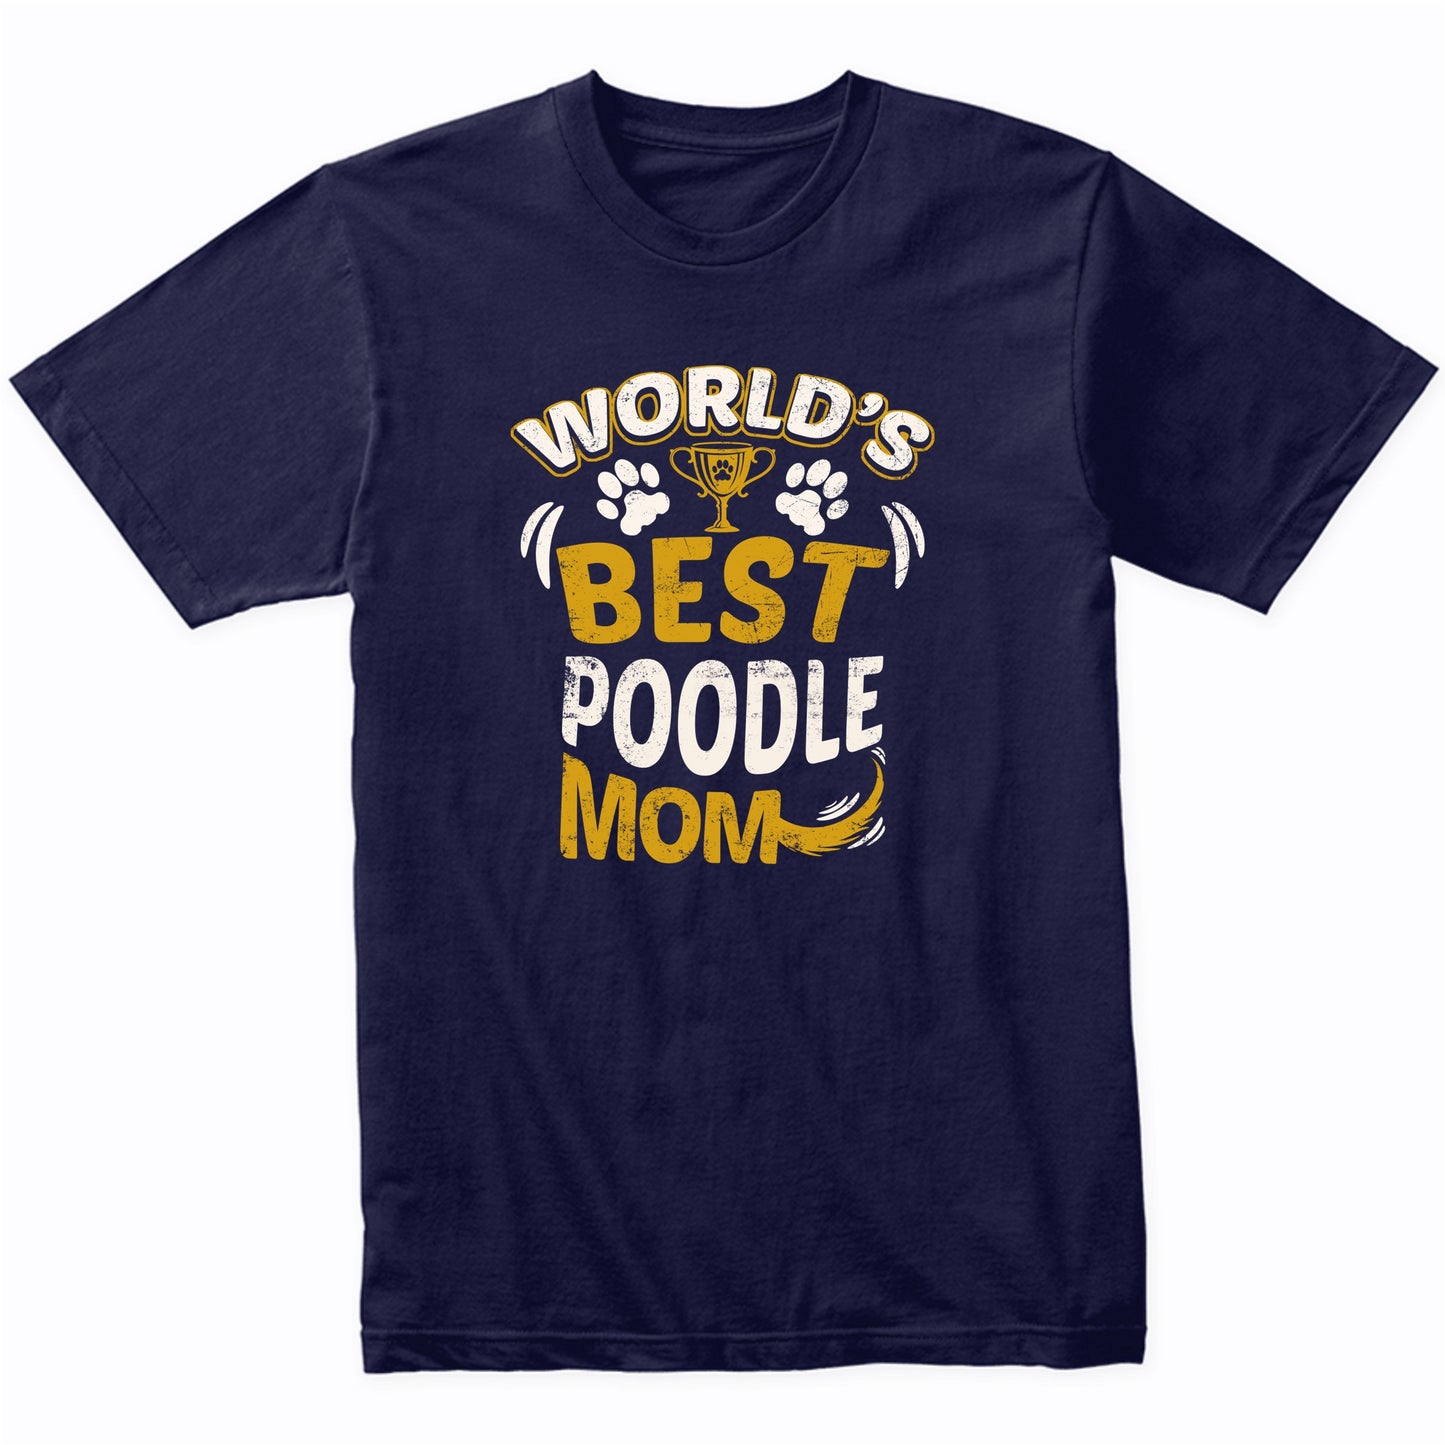 World's Best Poodle Mom Graphic T-Shirt